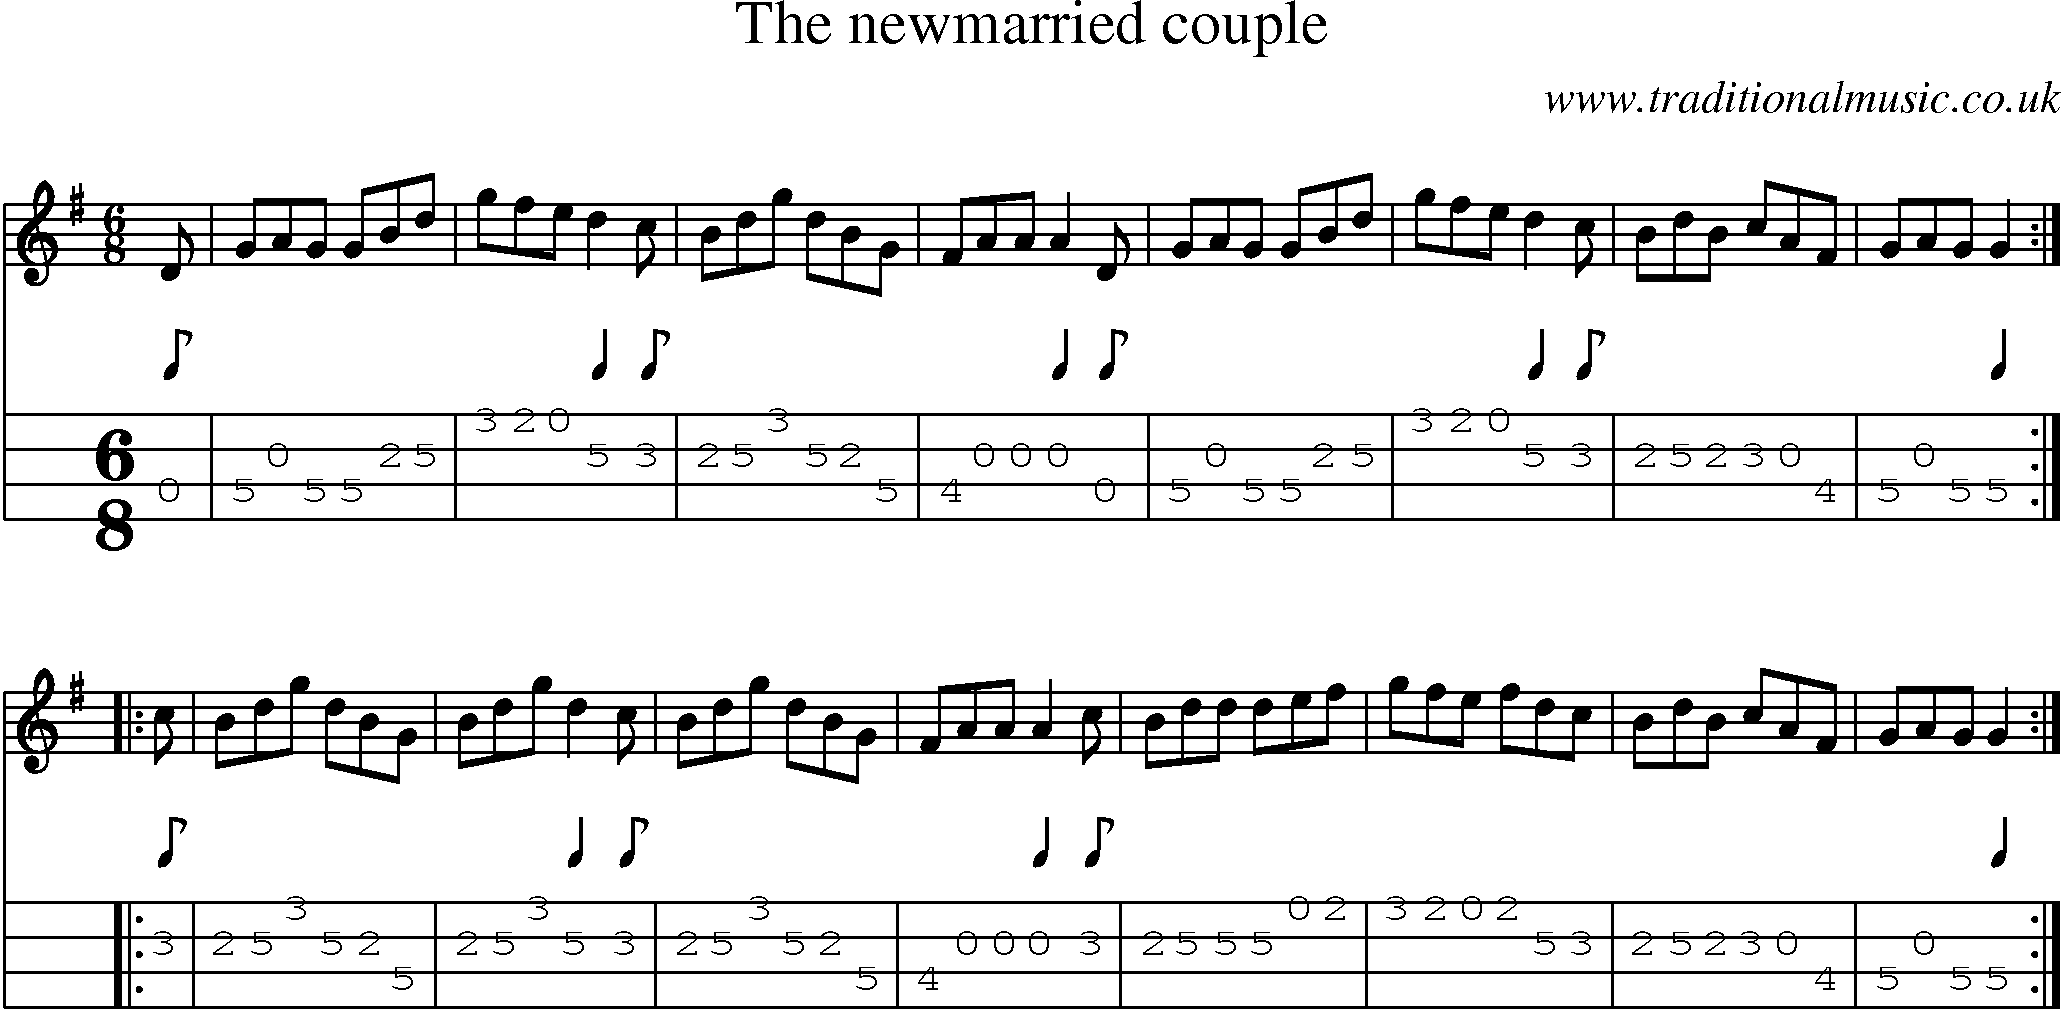 Music Score and Mandolin Tabs for Newmarried Couple